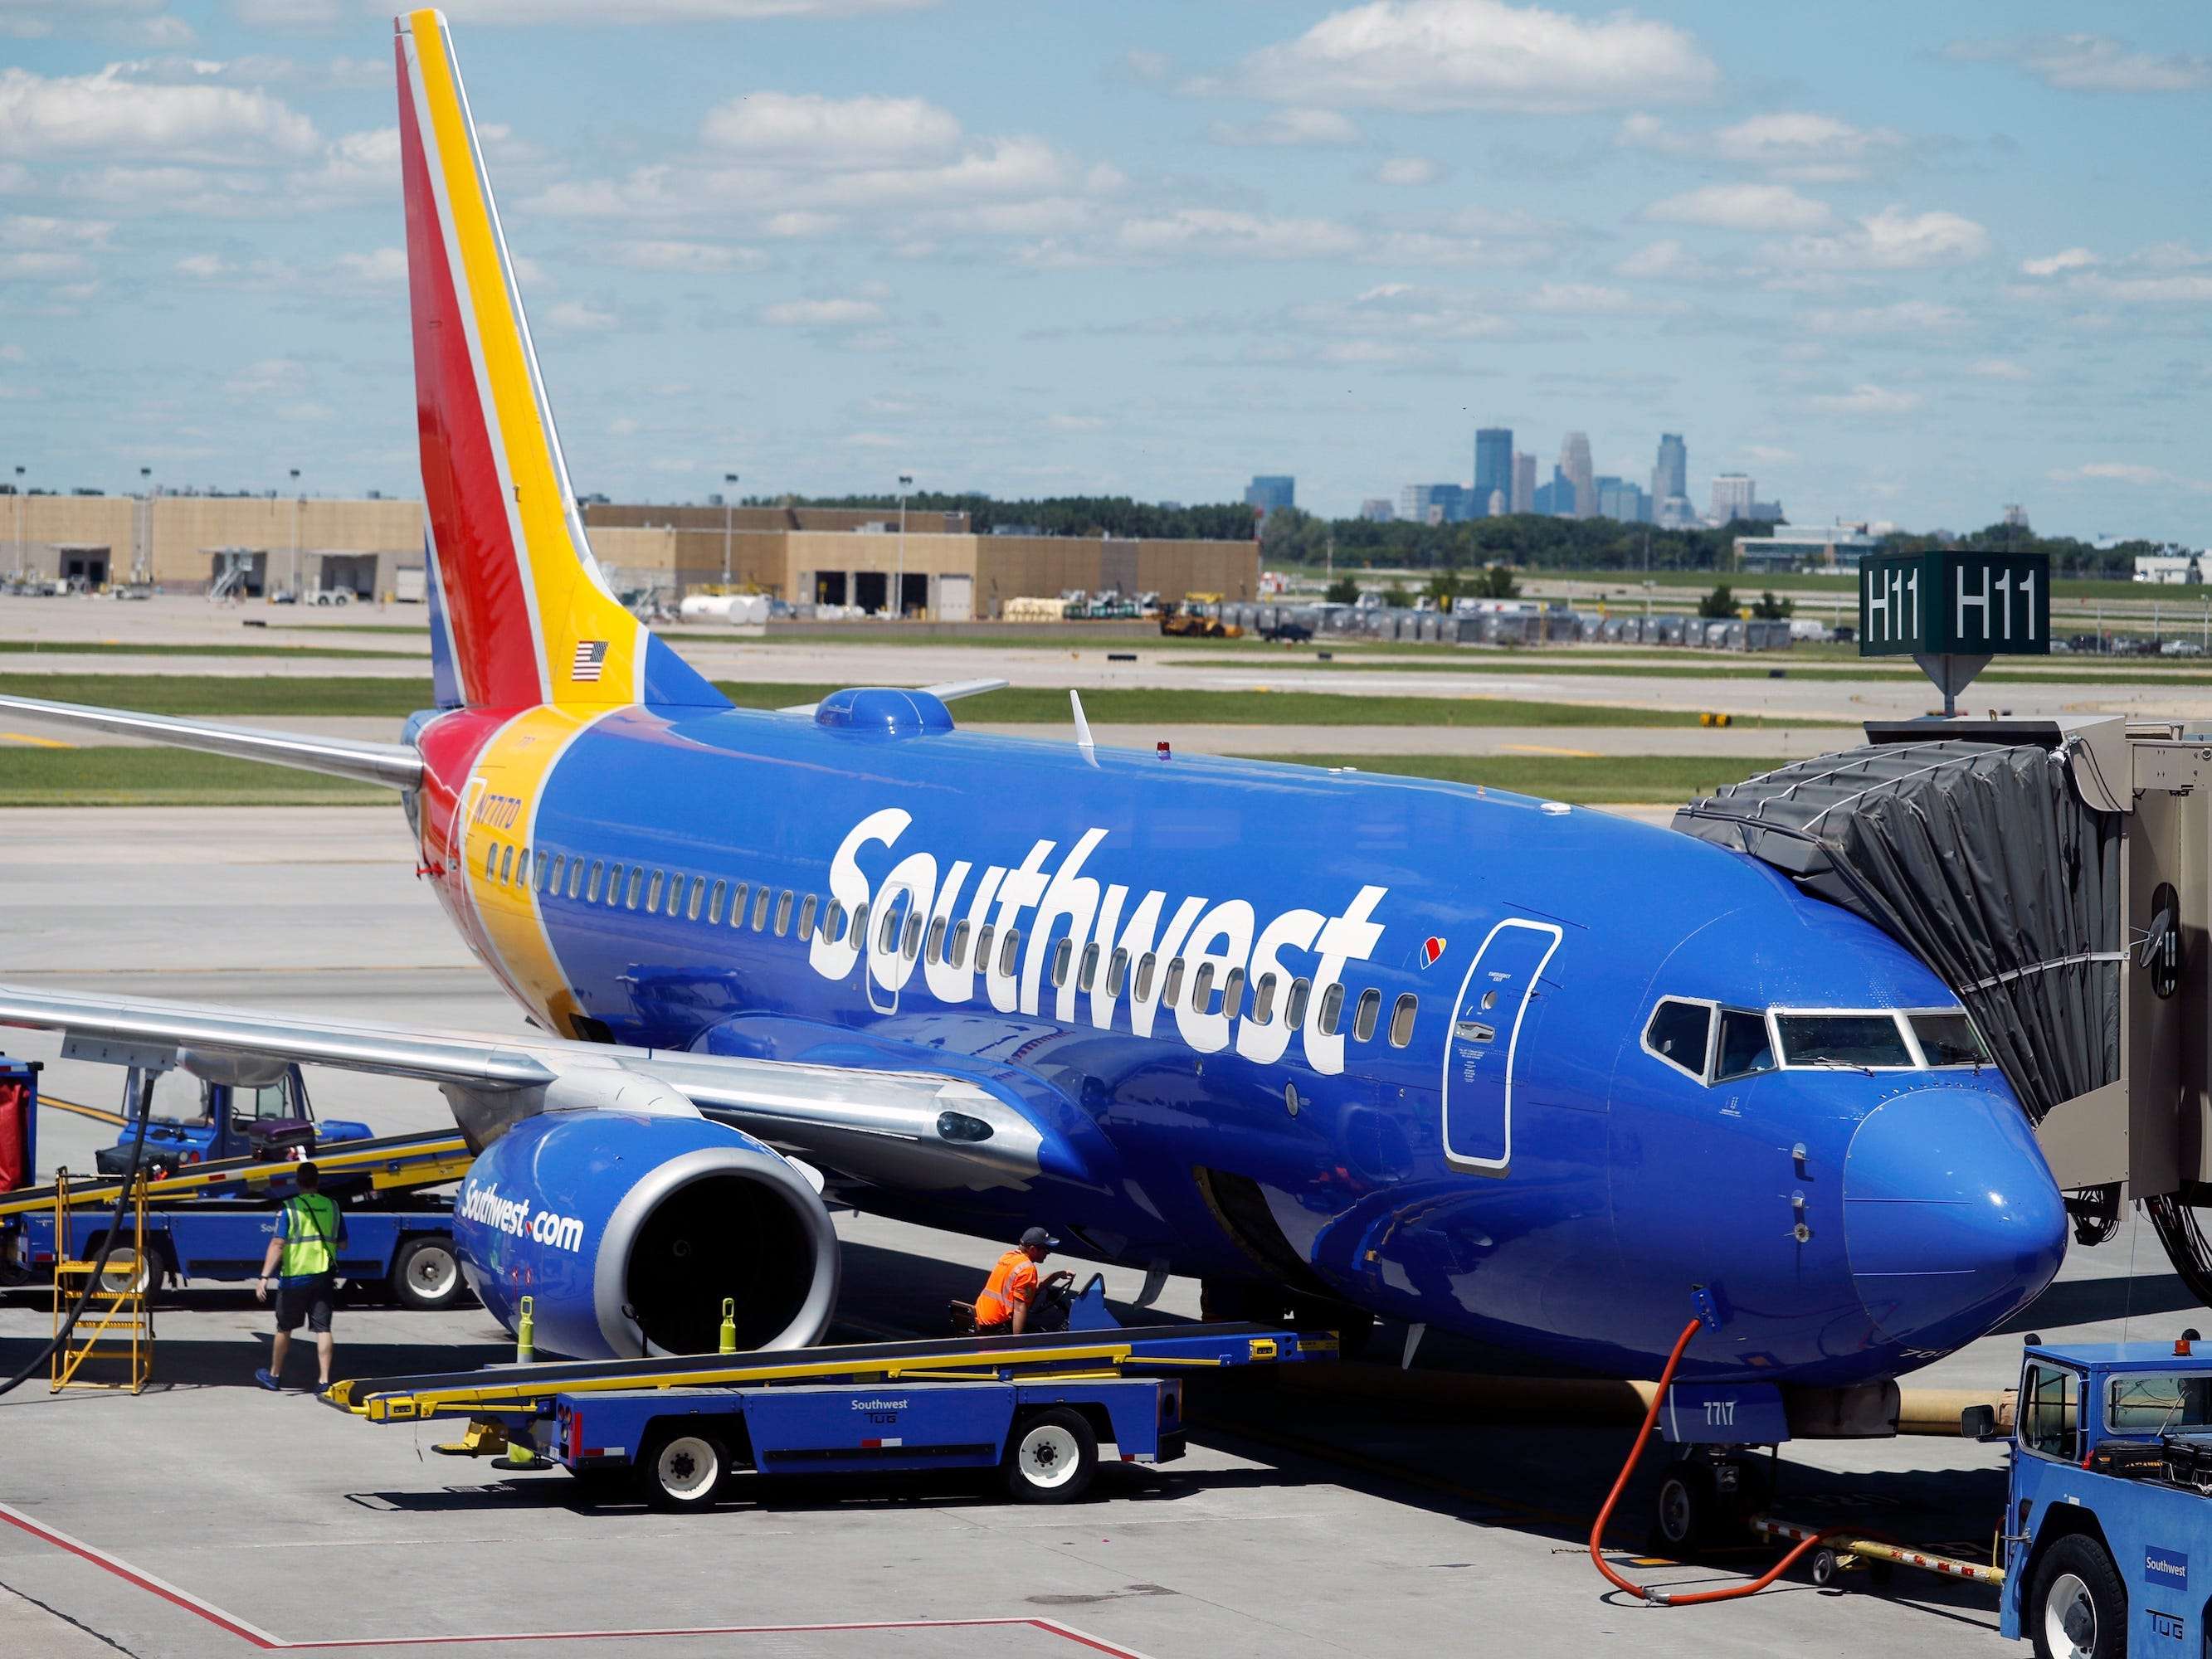 Southwest Airlines just announced 3 brandnew destinations in a